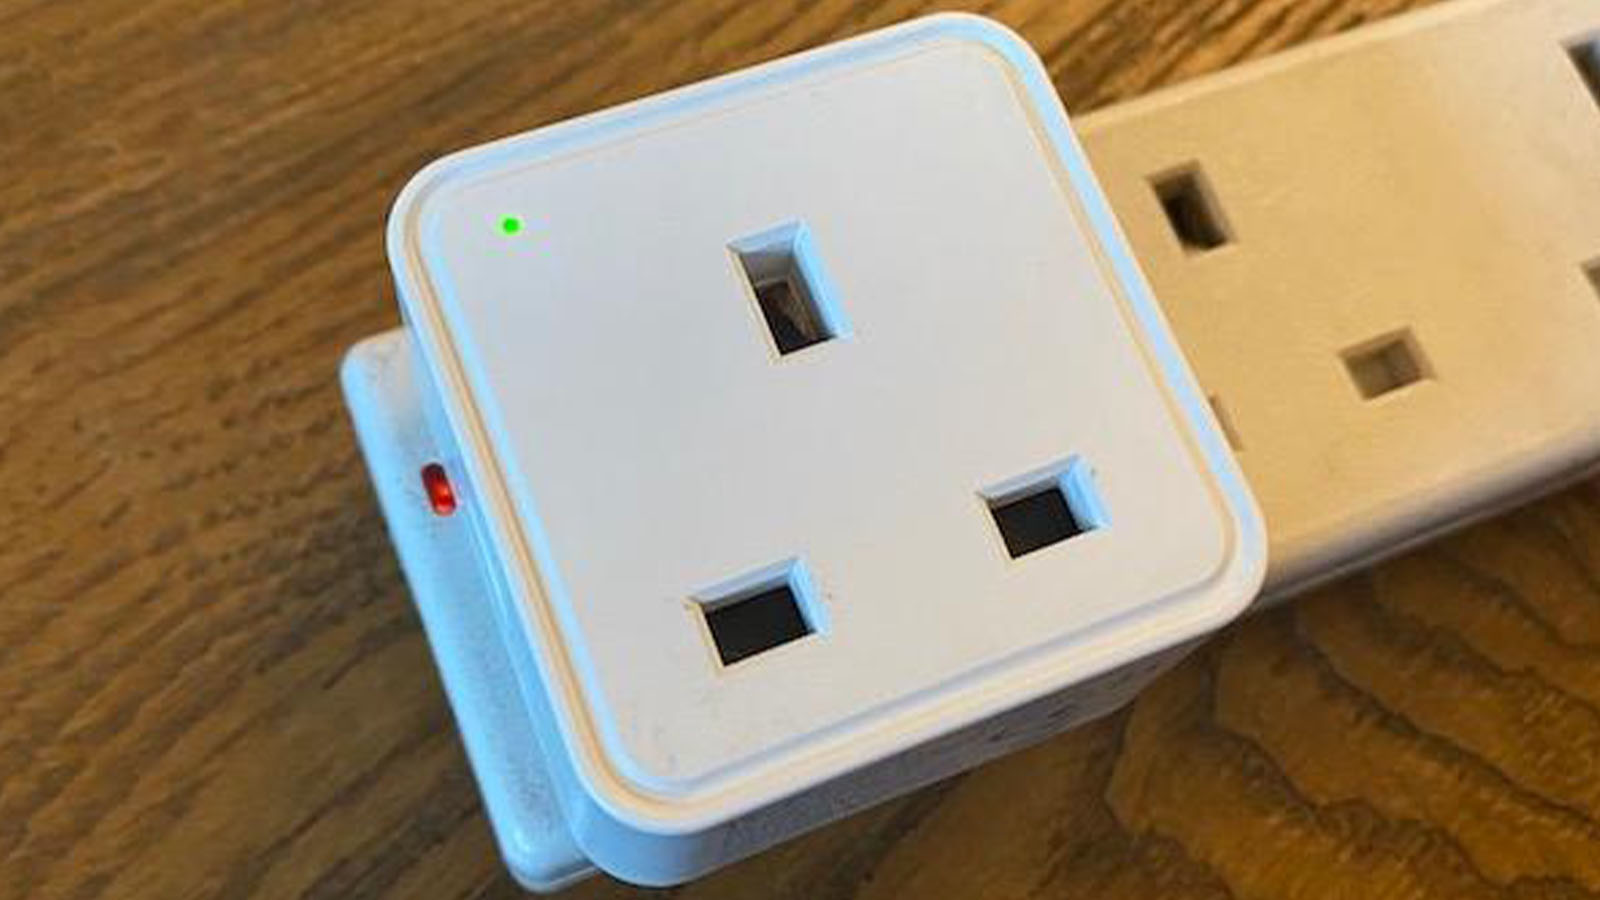 TCP Wi-Fi Smart Plug - Excellent features in a compact plug